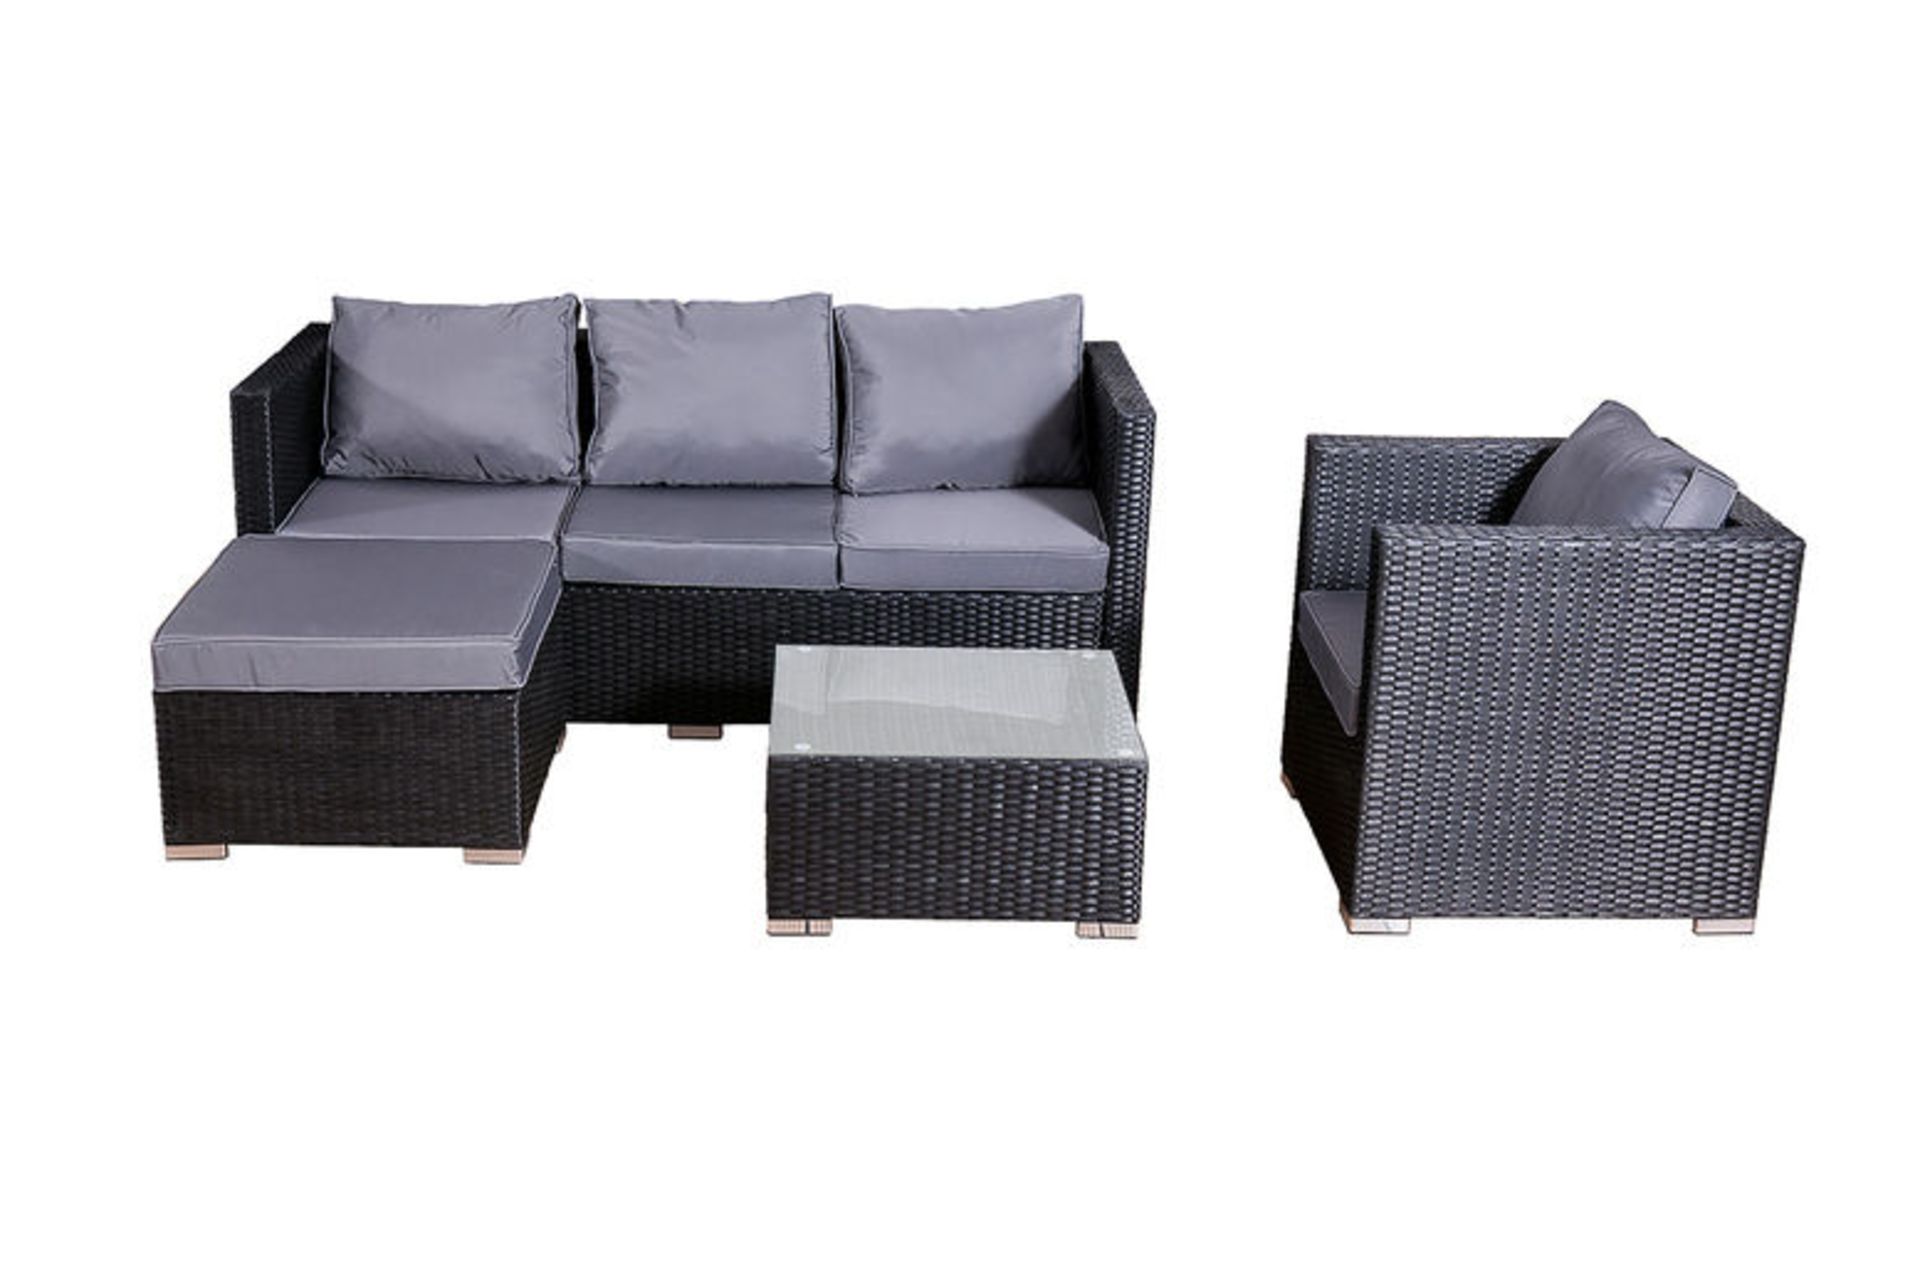 PALLET CONTAINING 2 X BRAND NEW 5 SEATER RATTAN GARDEN SETS (BLACK)